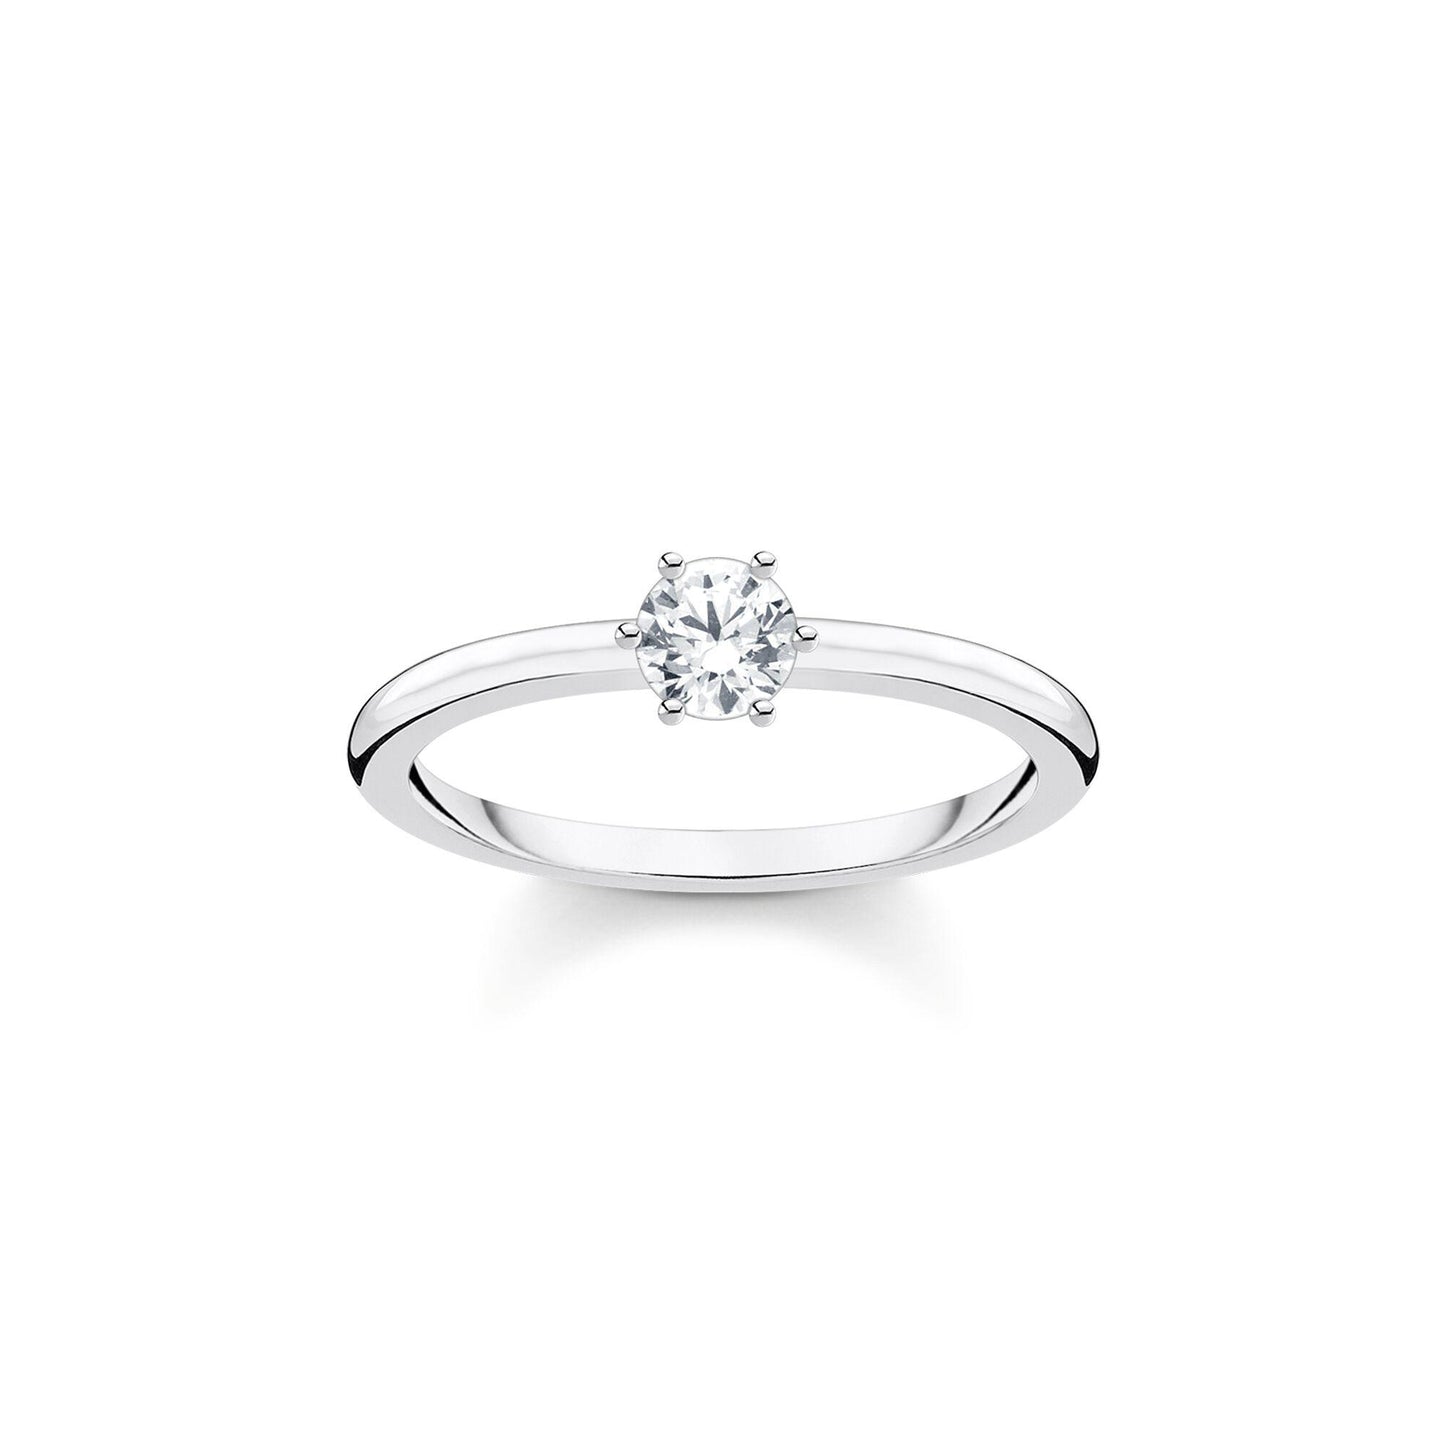 Thomas Sabo Sterling Silver 6-Claw Single Stone Cubic Zirconia Ring TR2313-051-14 - Judith Hart Jewellers